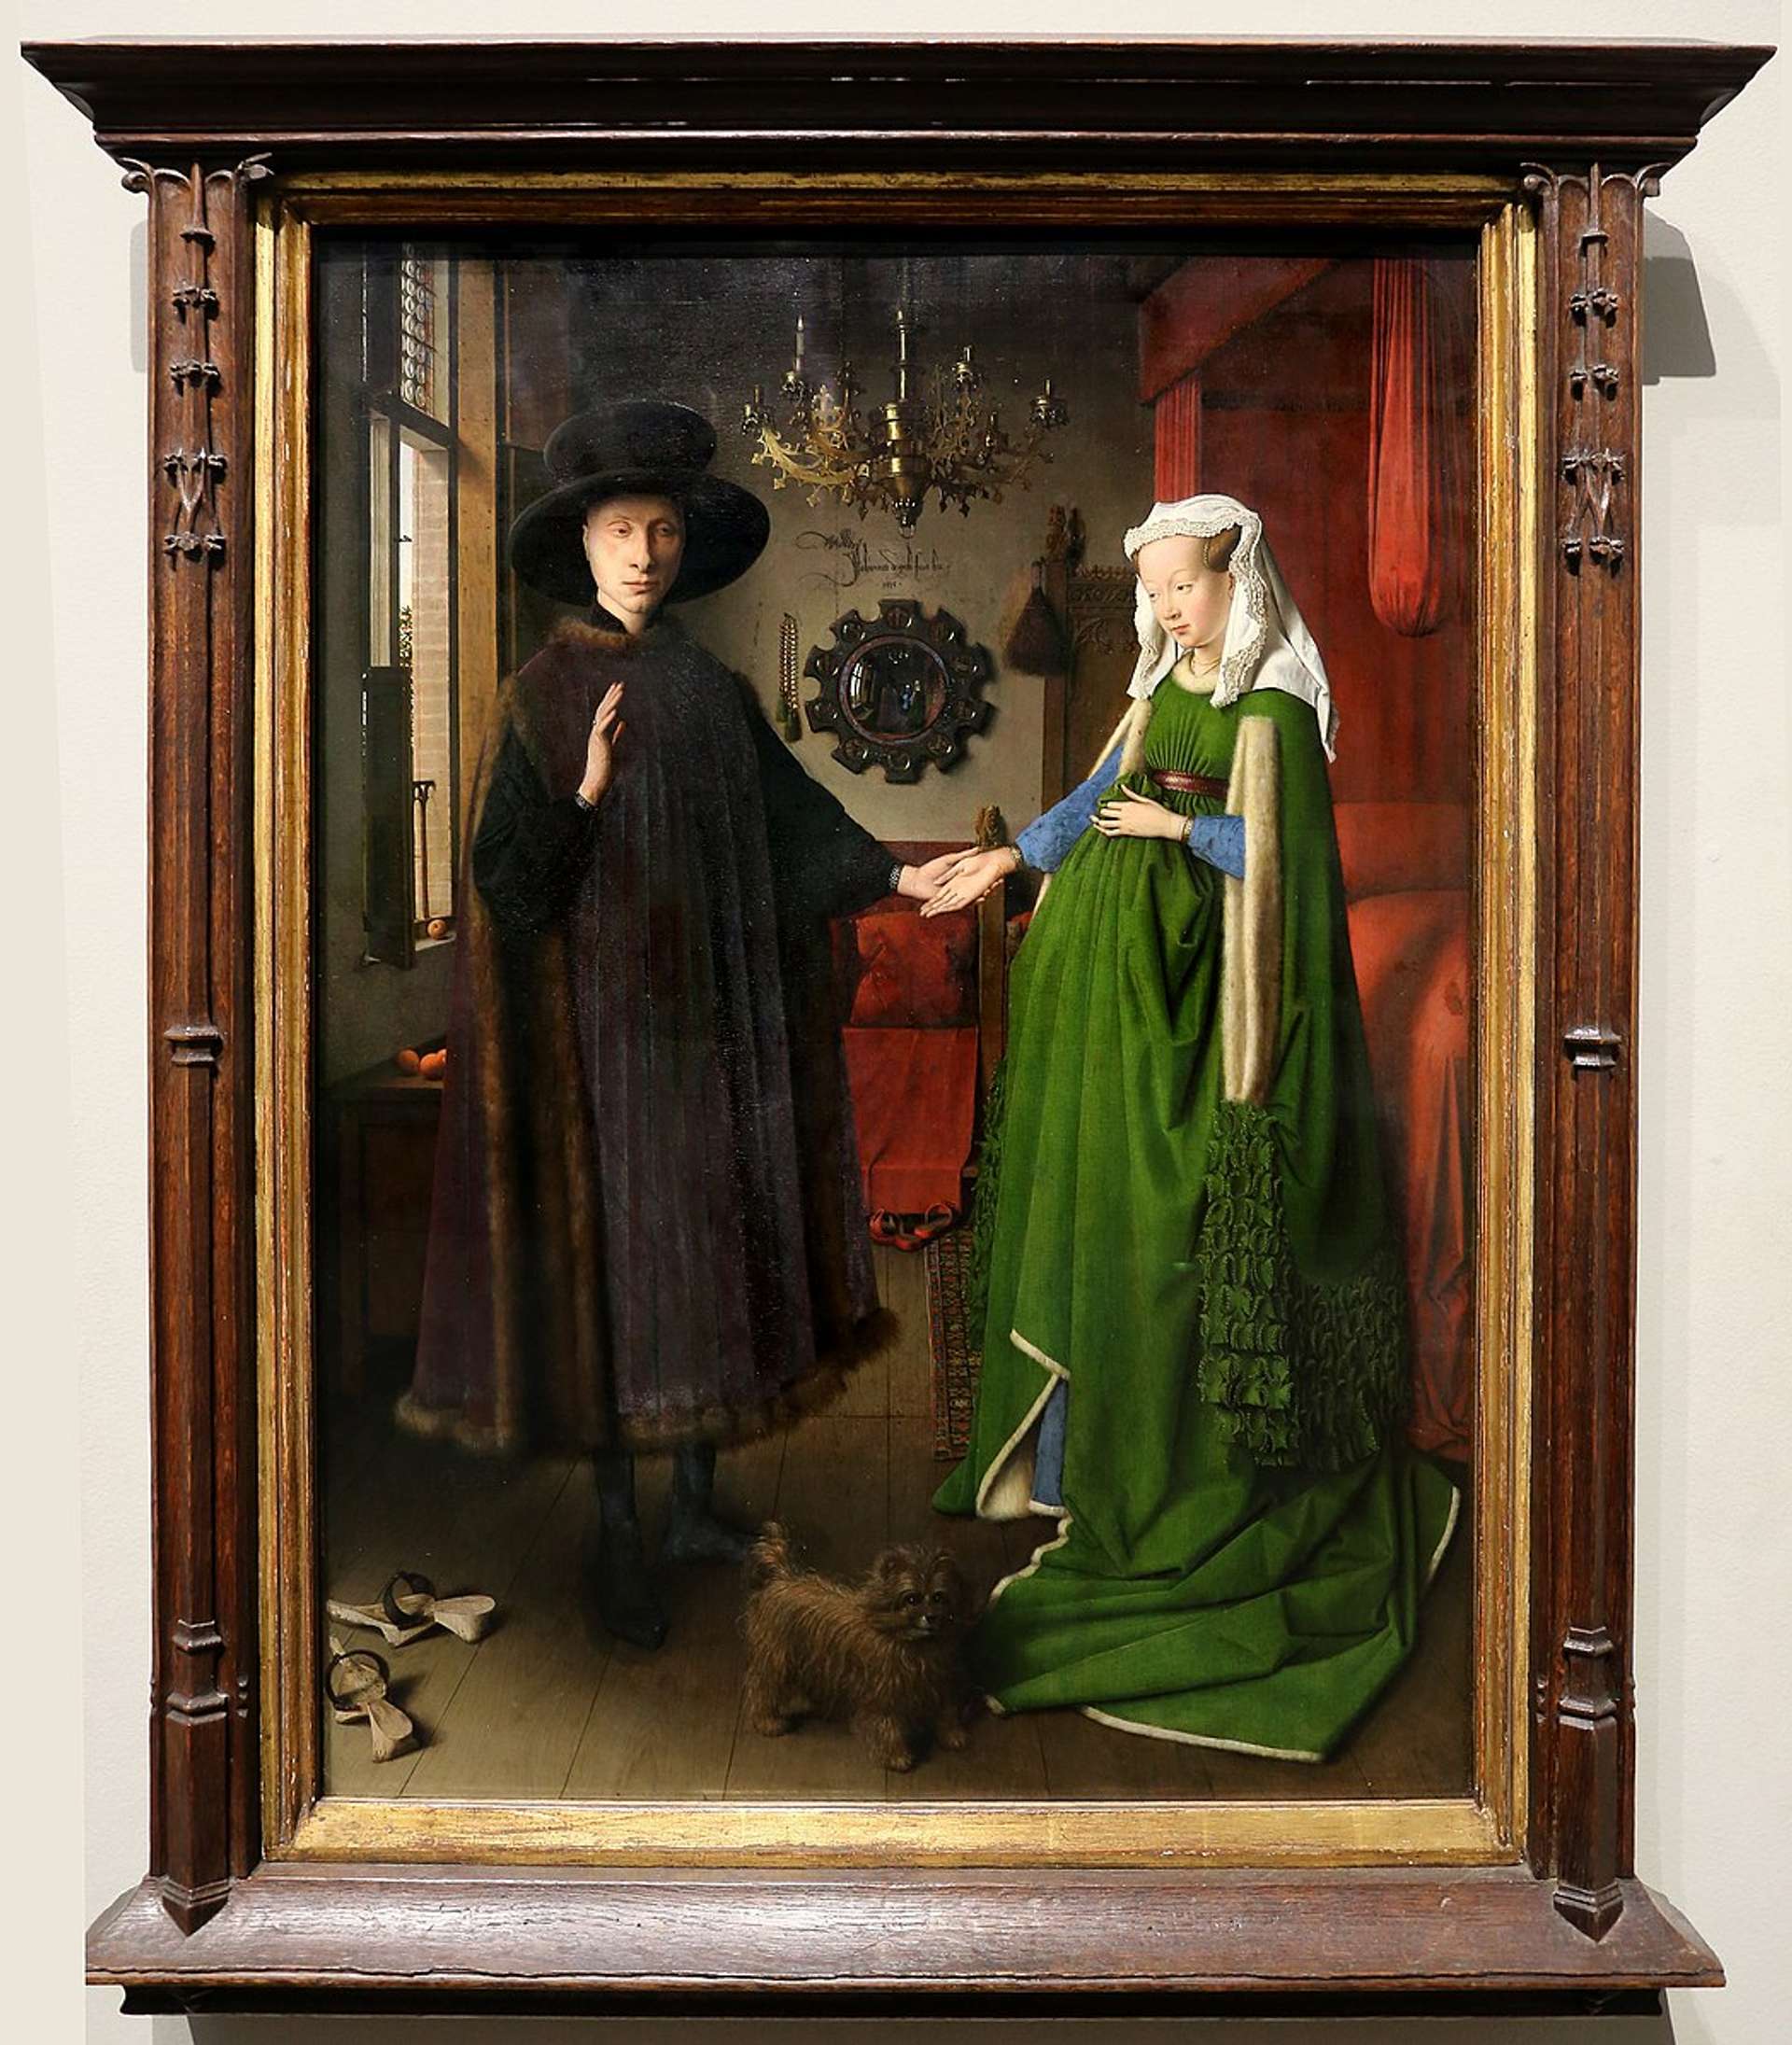 A 15th-century oil painting titled "Arnolfini Portrait" by Jan van Eyck, depicting a wealthy merchant and his wife standing in a room filled with intricate details, including a convex mirror reflecting the couple and two other figures.